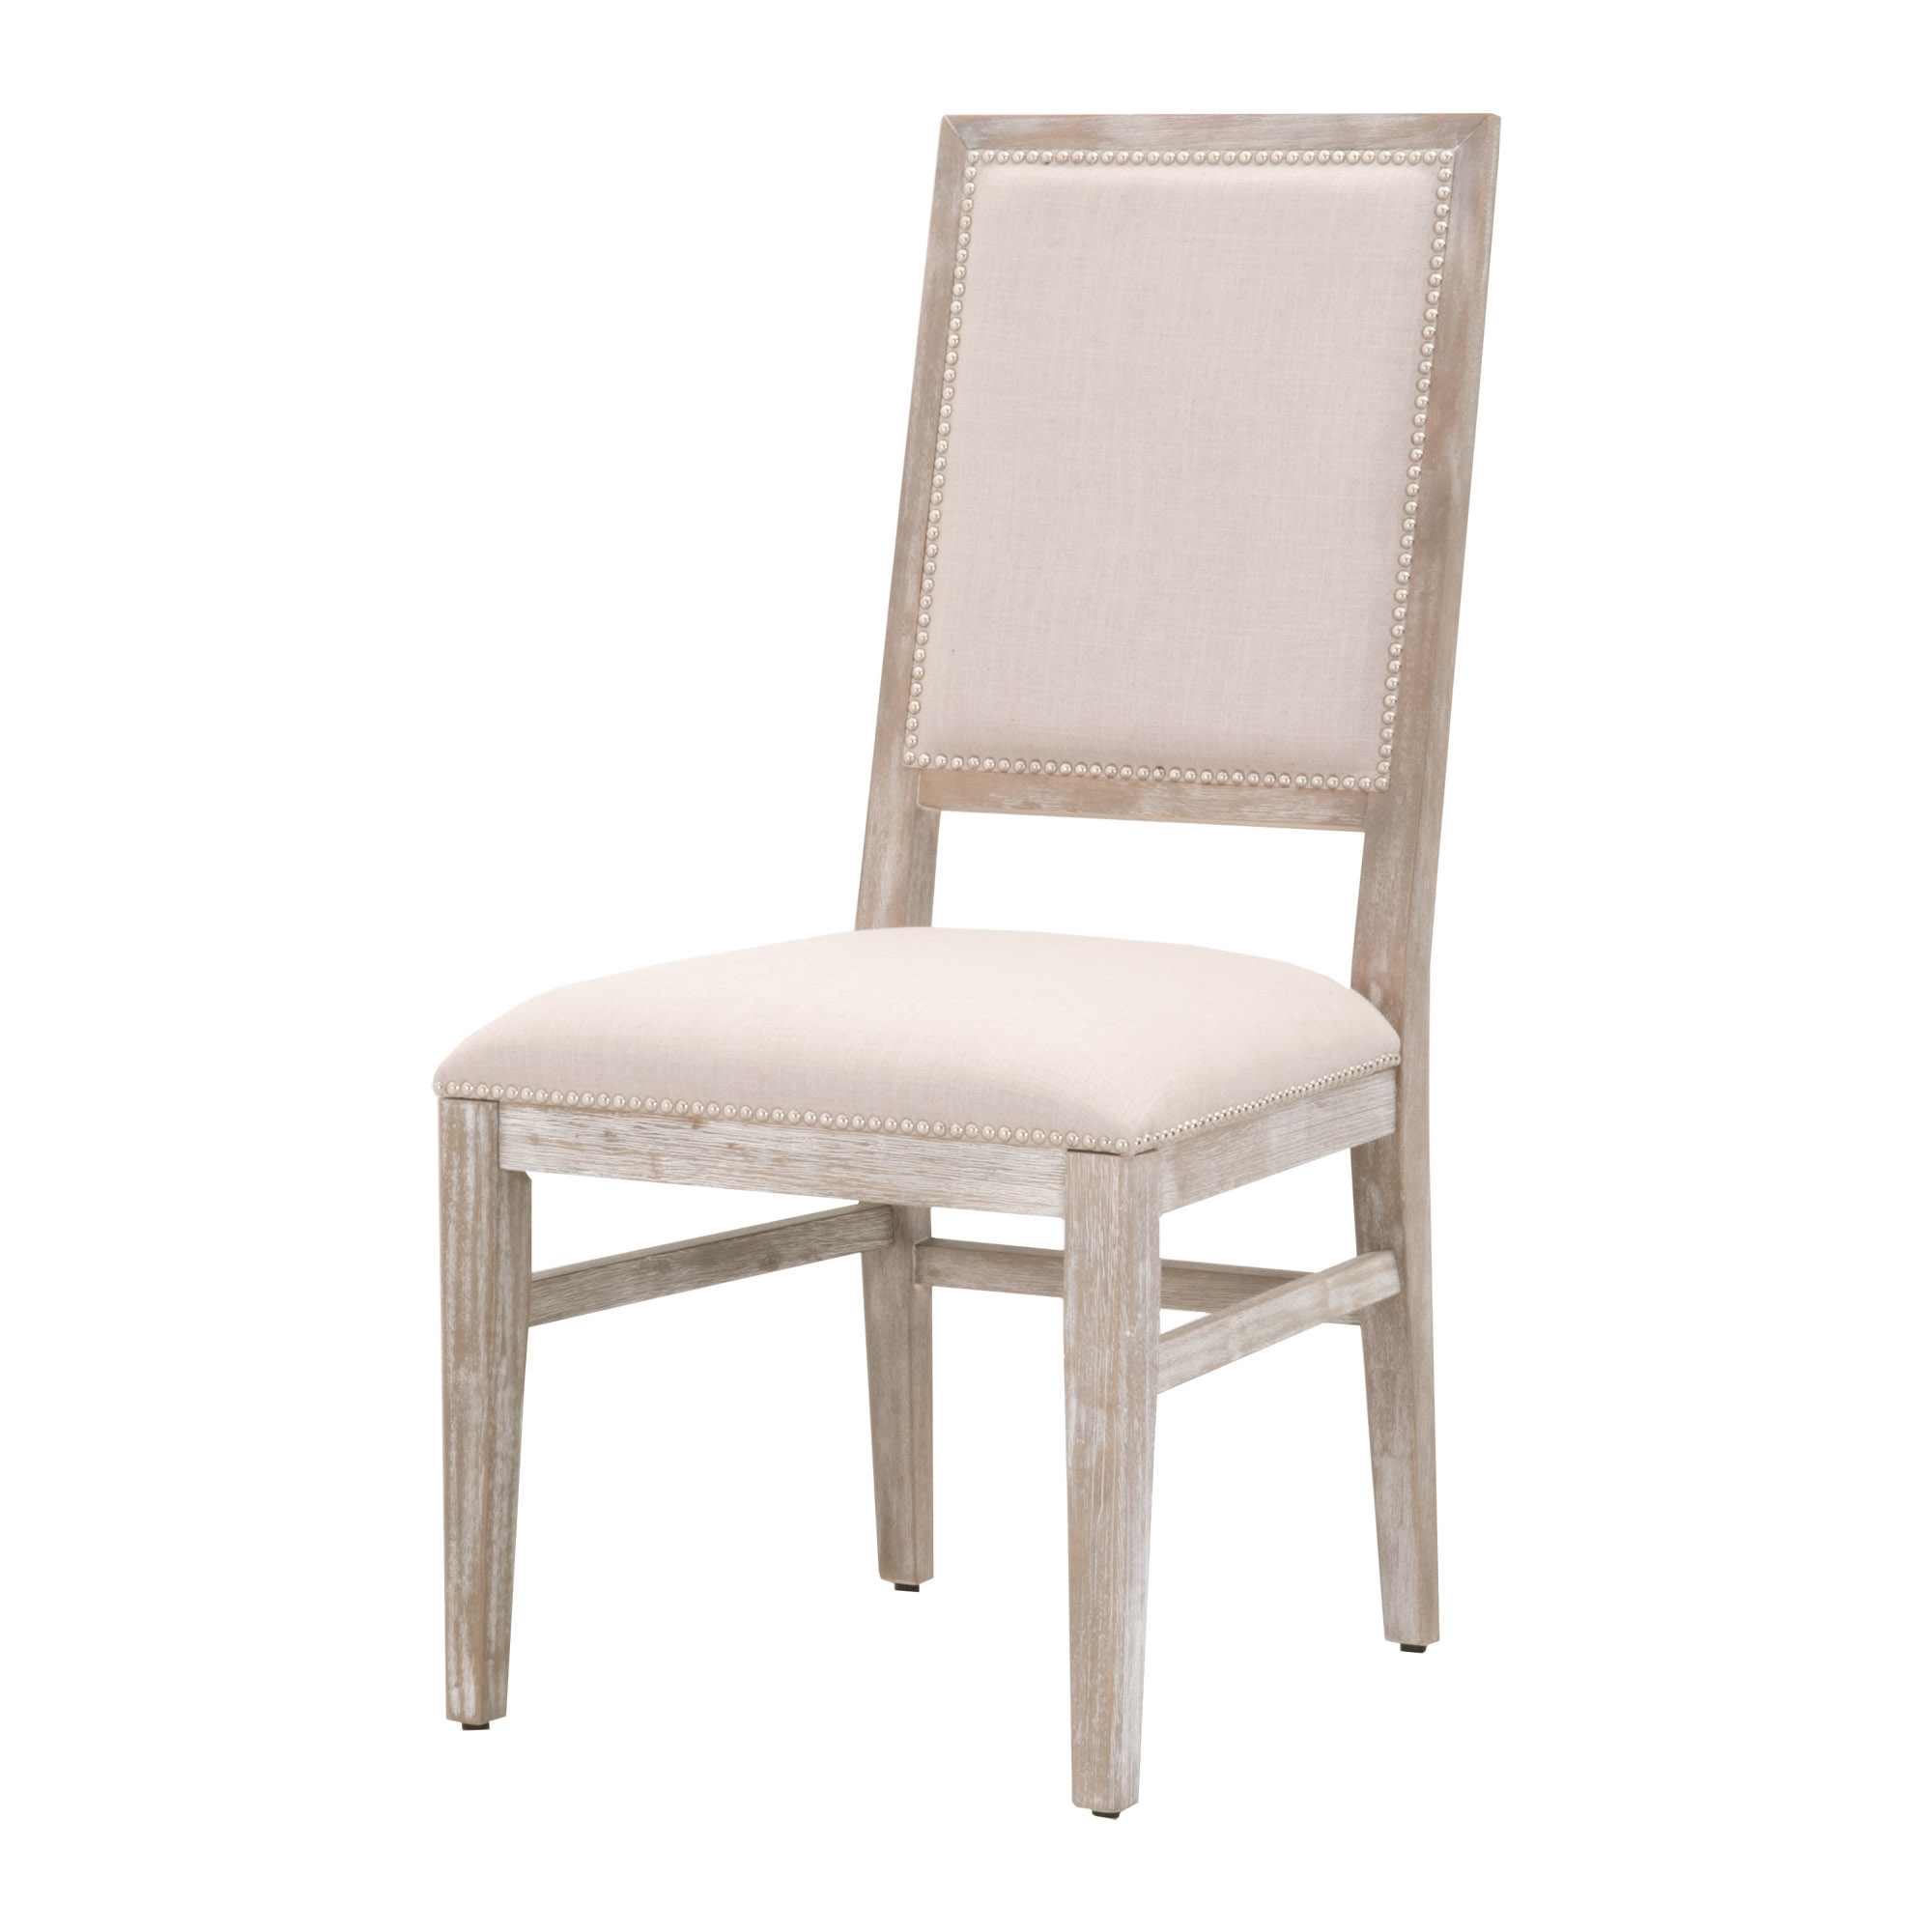 Dexter Dining Chair, Set of 2 - Image 1